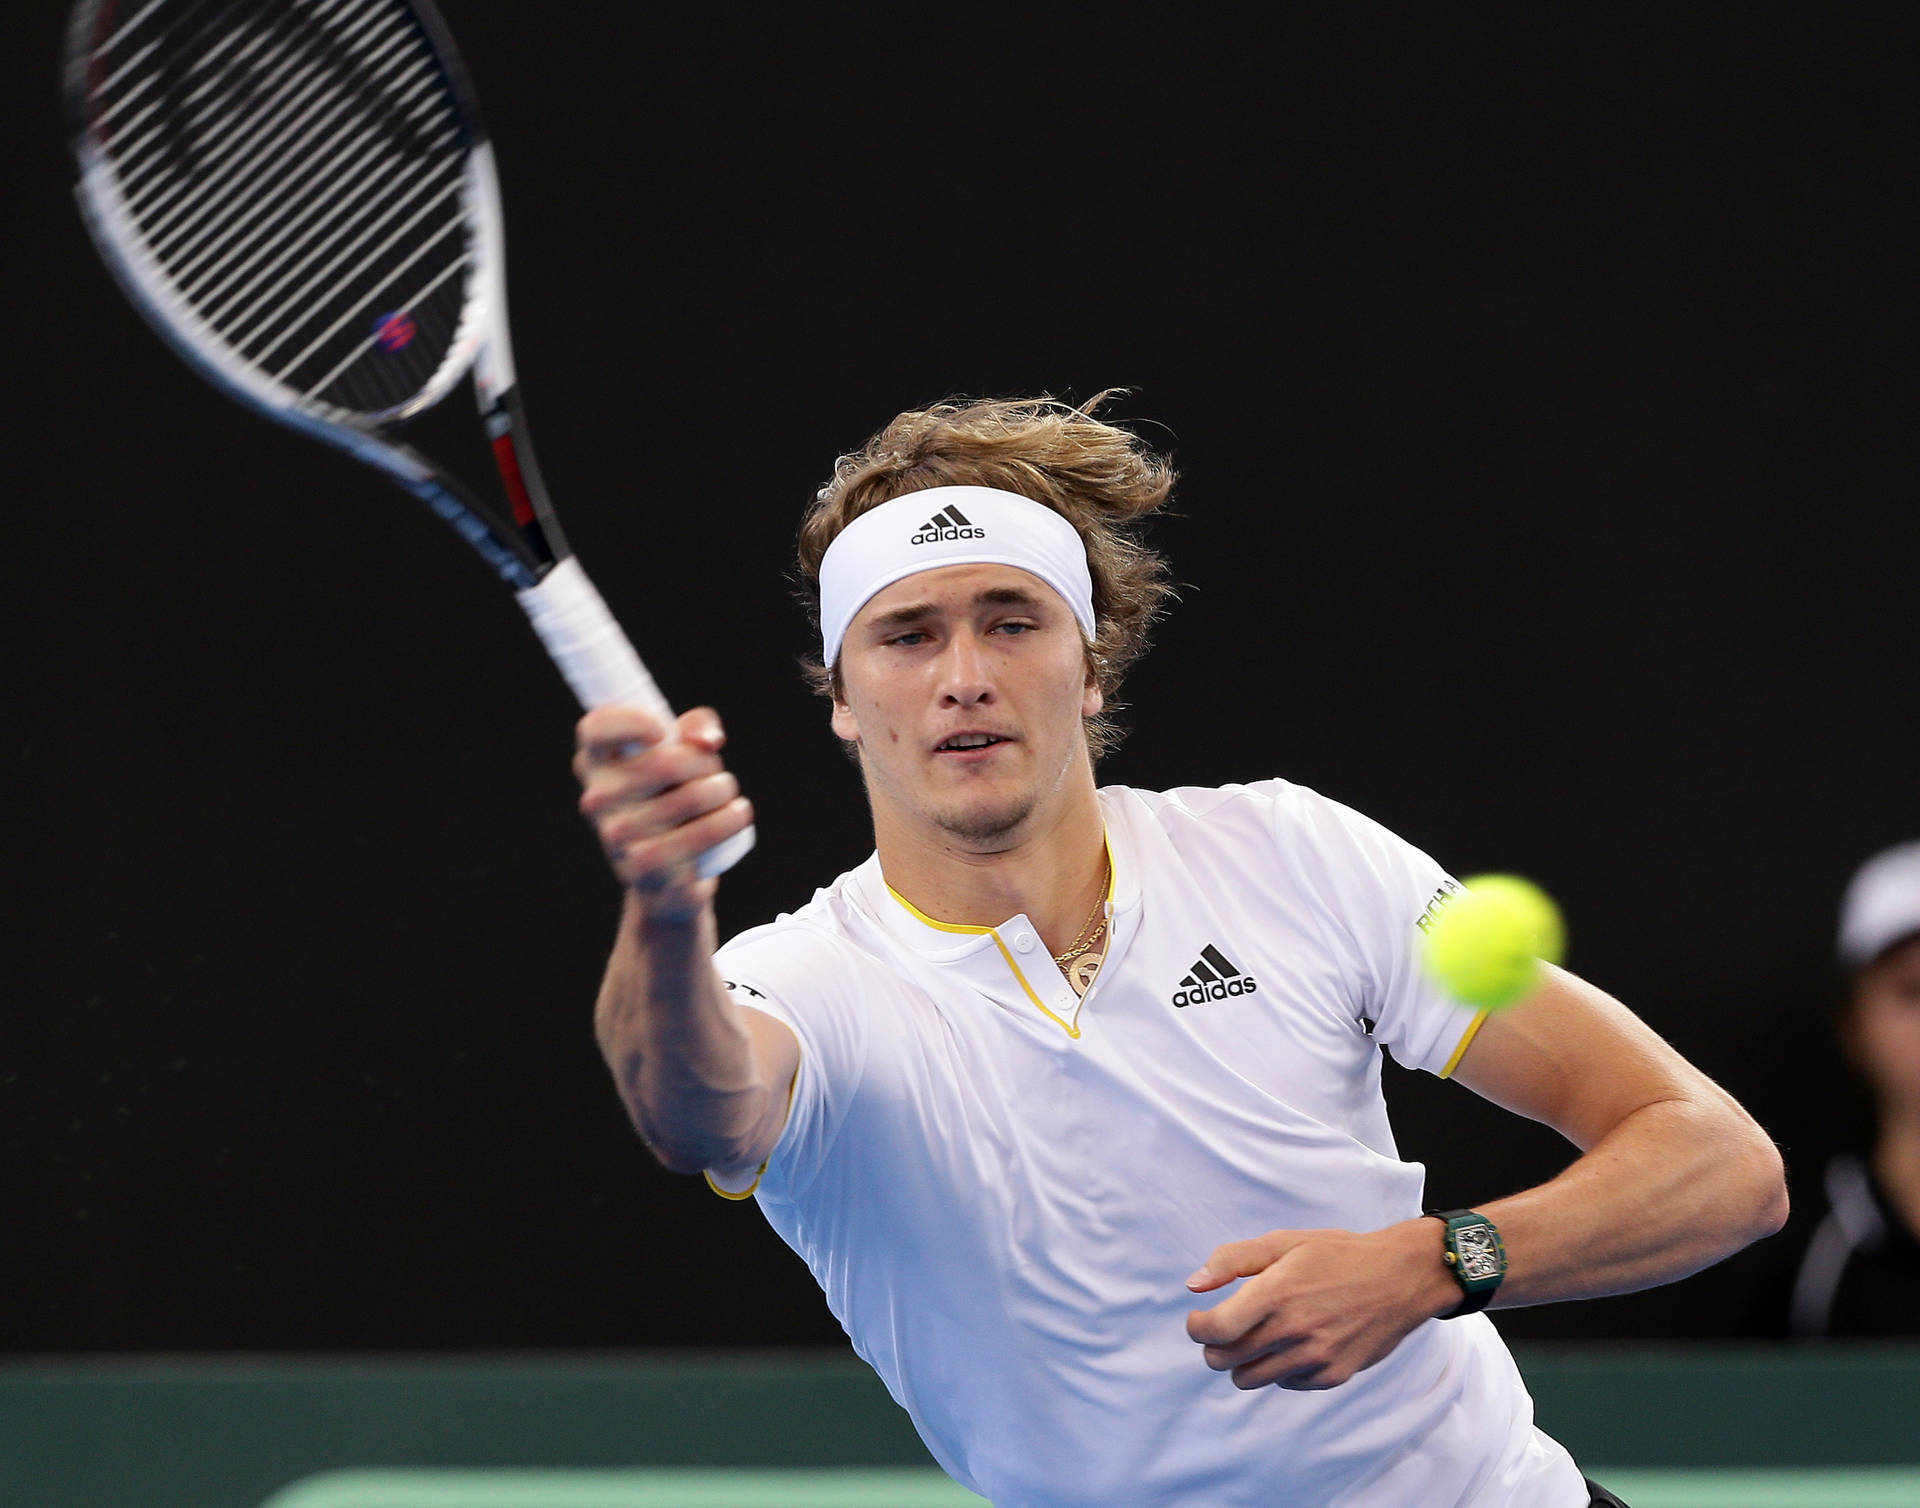 Alexander Zverev Delivers a Forehand Volley on Court Wallpaper